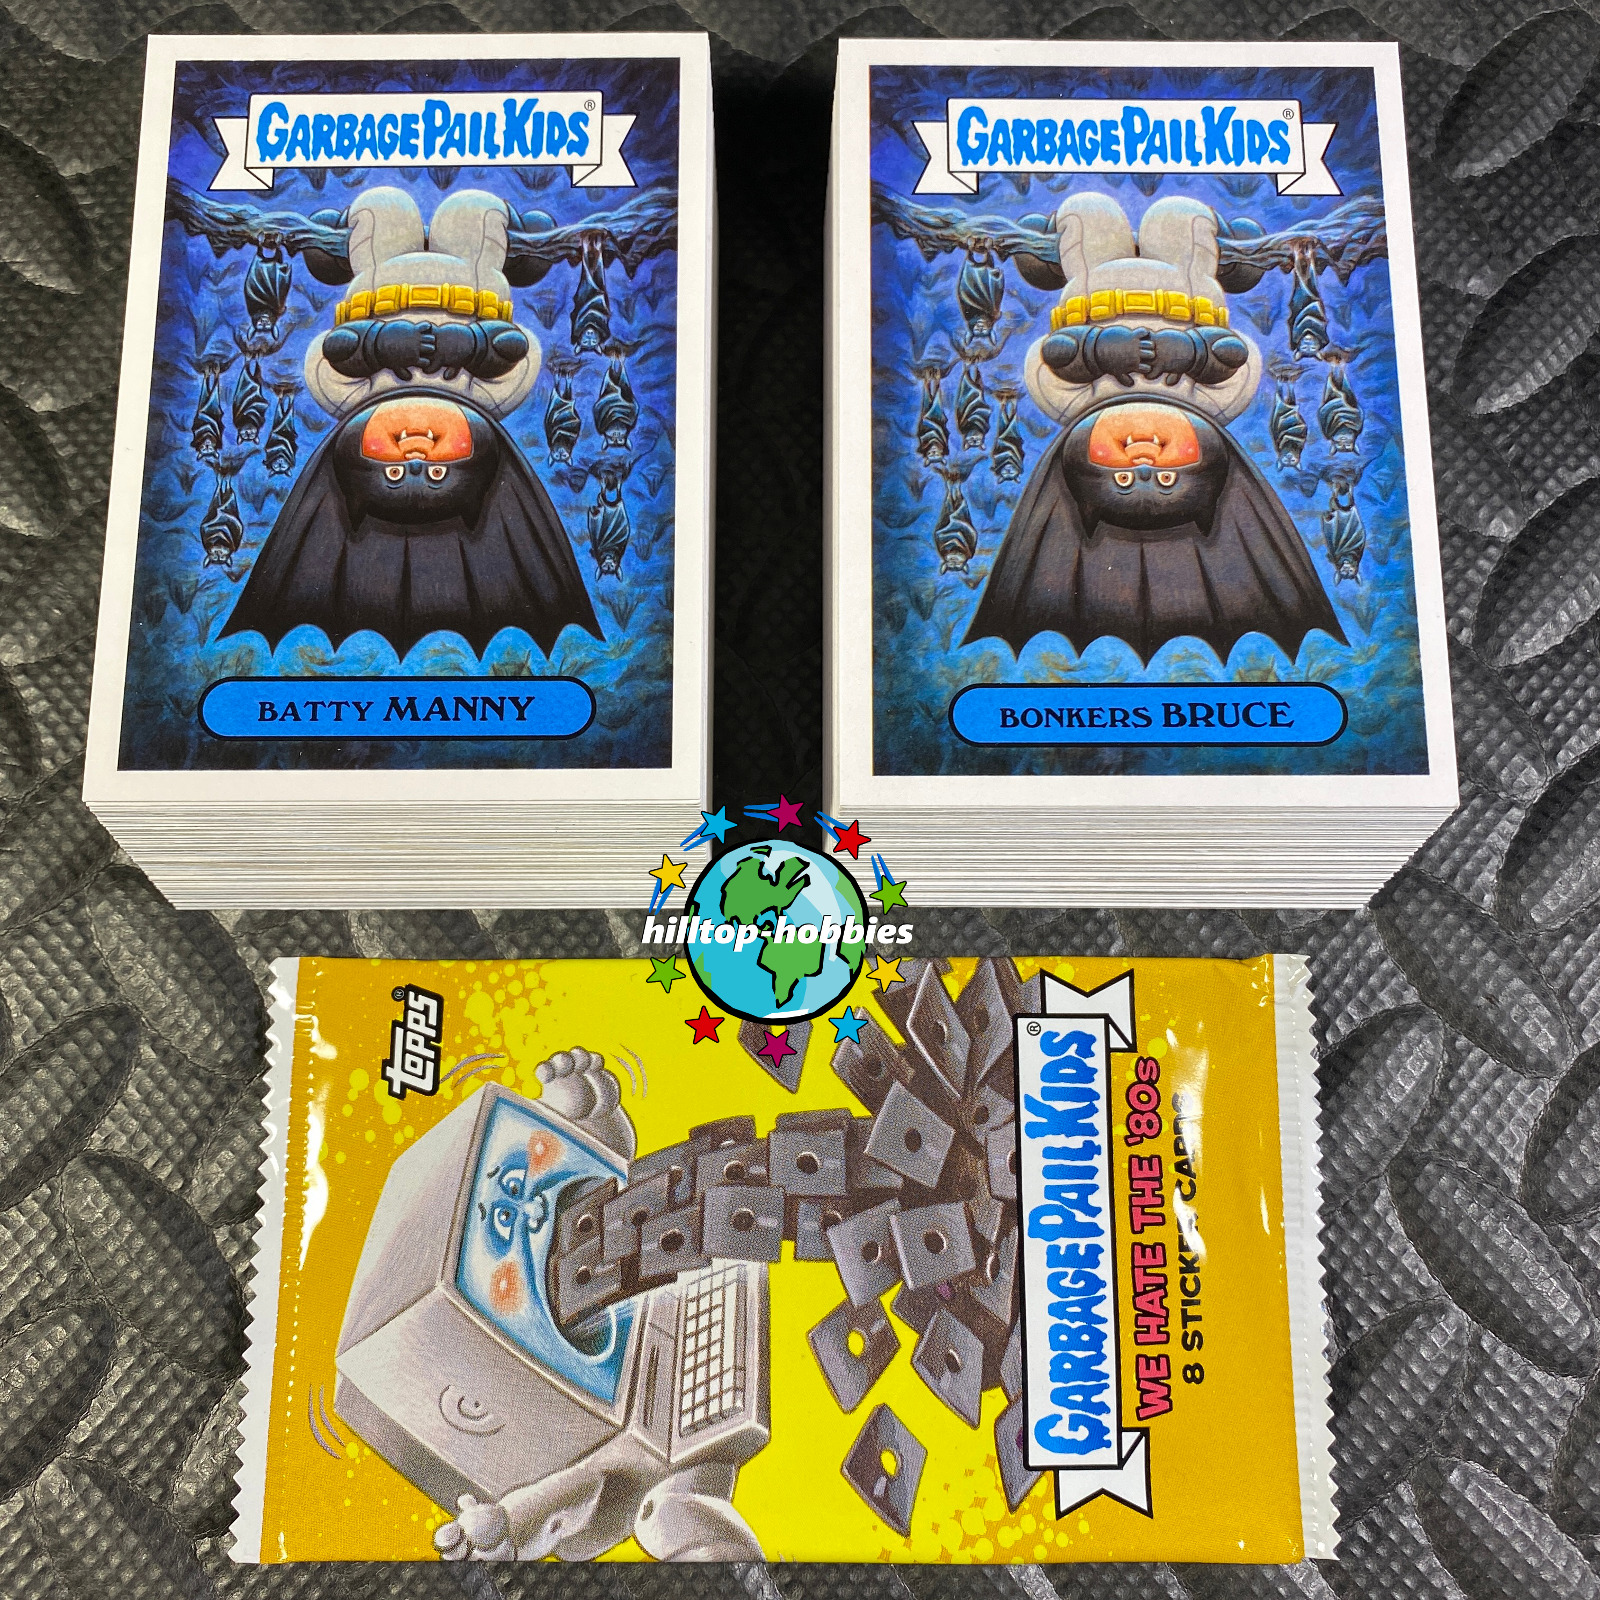 2018 GARBAGE PAIL KIDS WE HATE THE '80s COMPLETE 180-CARD BASE SET +WRAPPER GPK